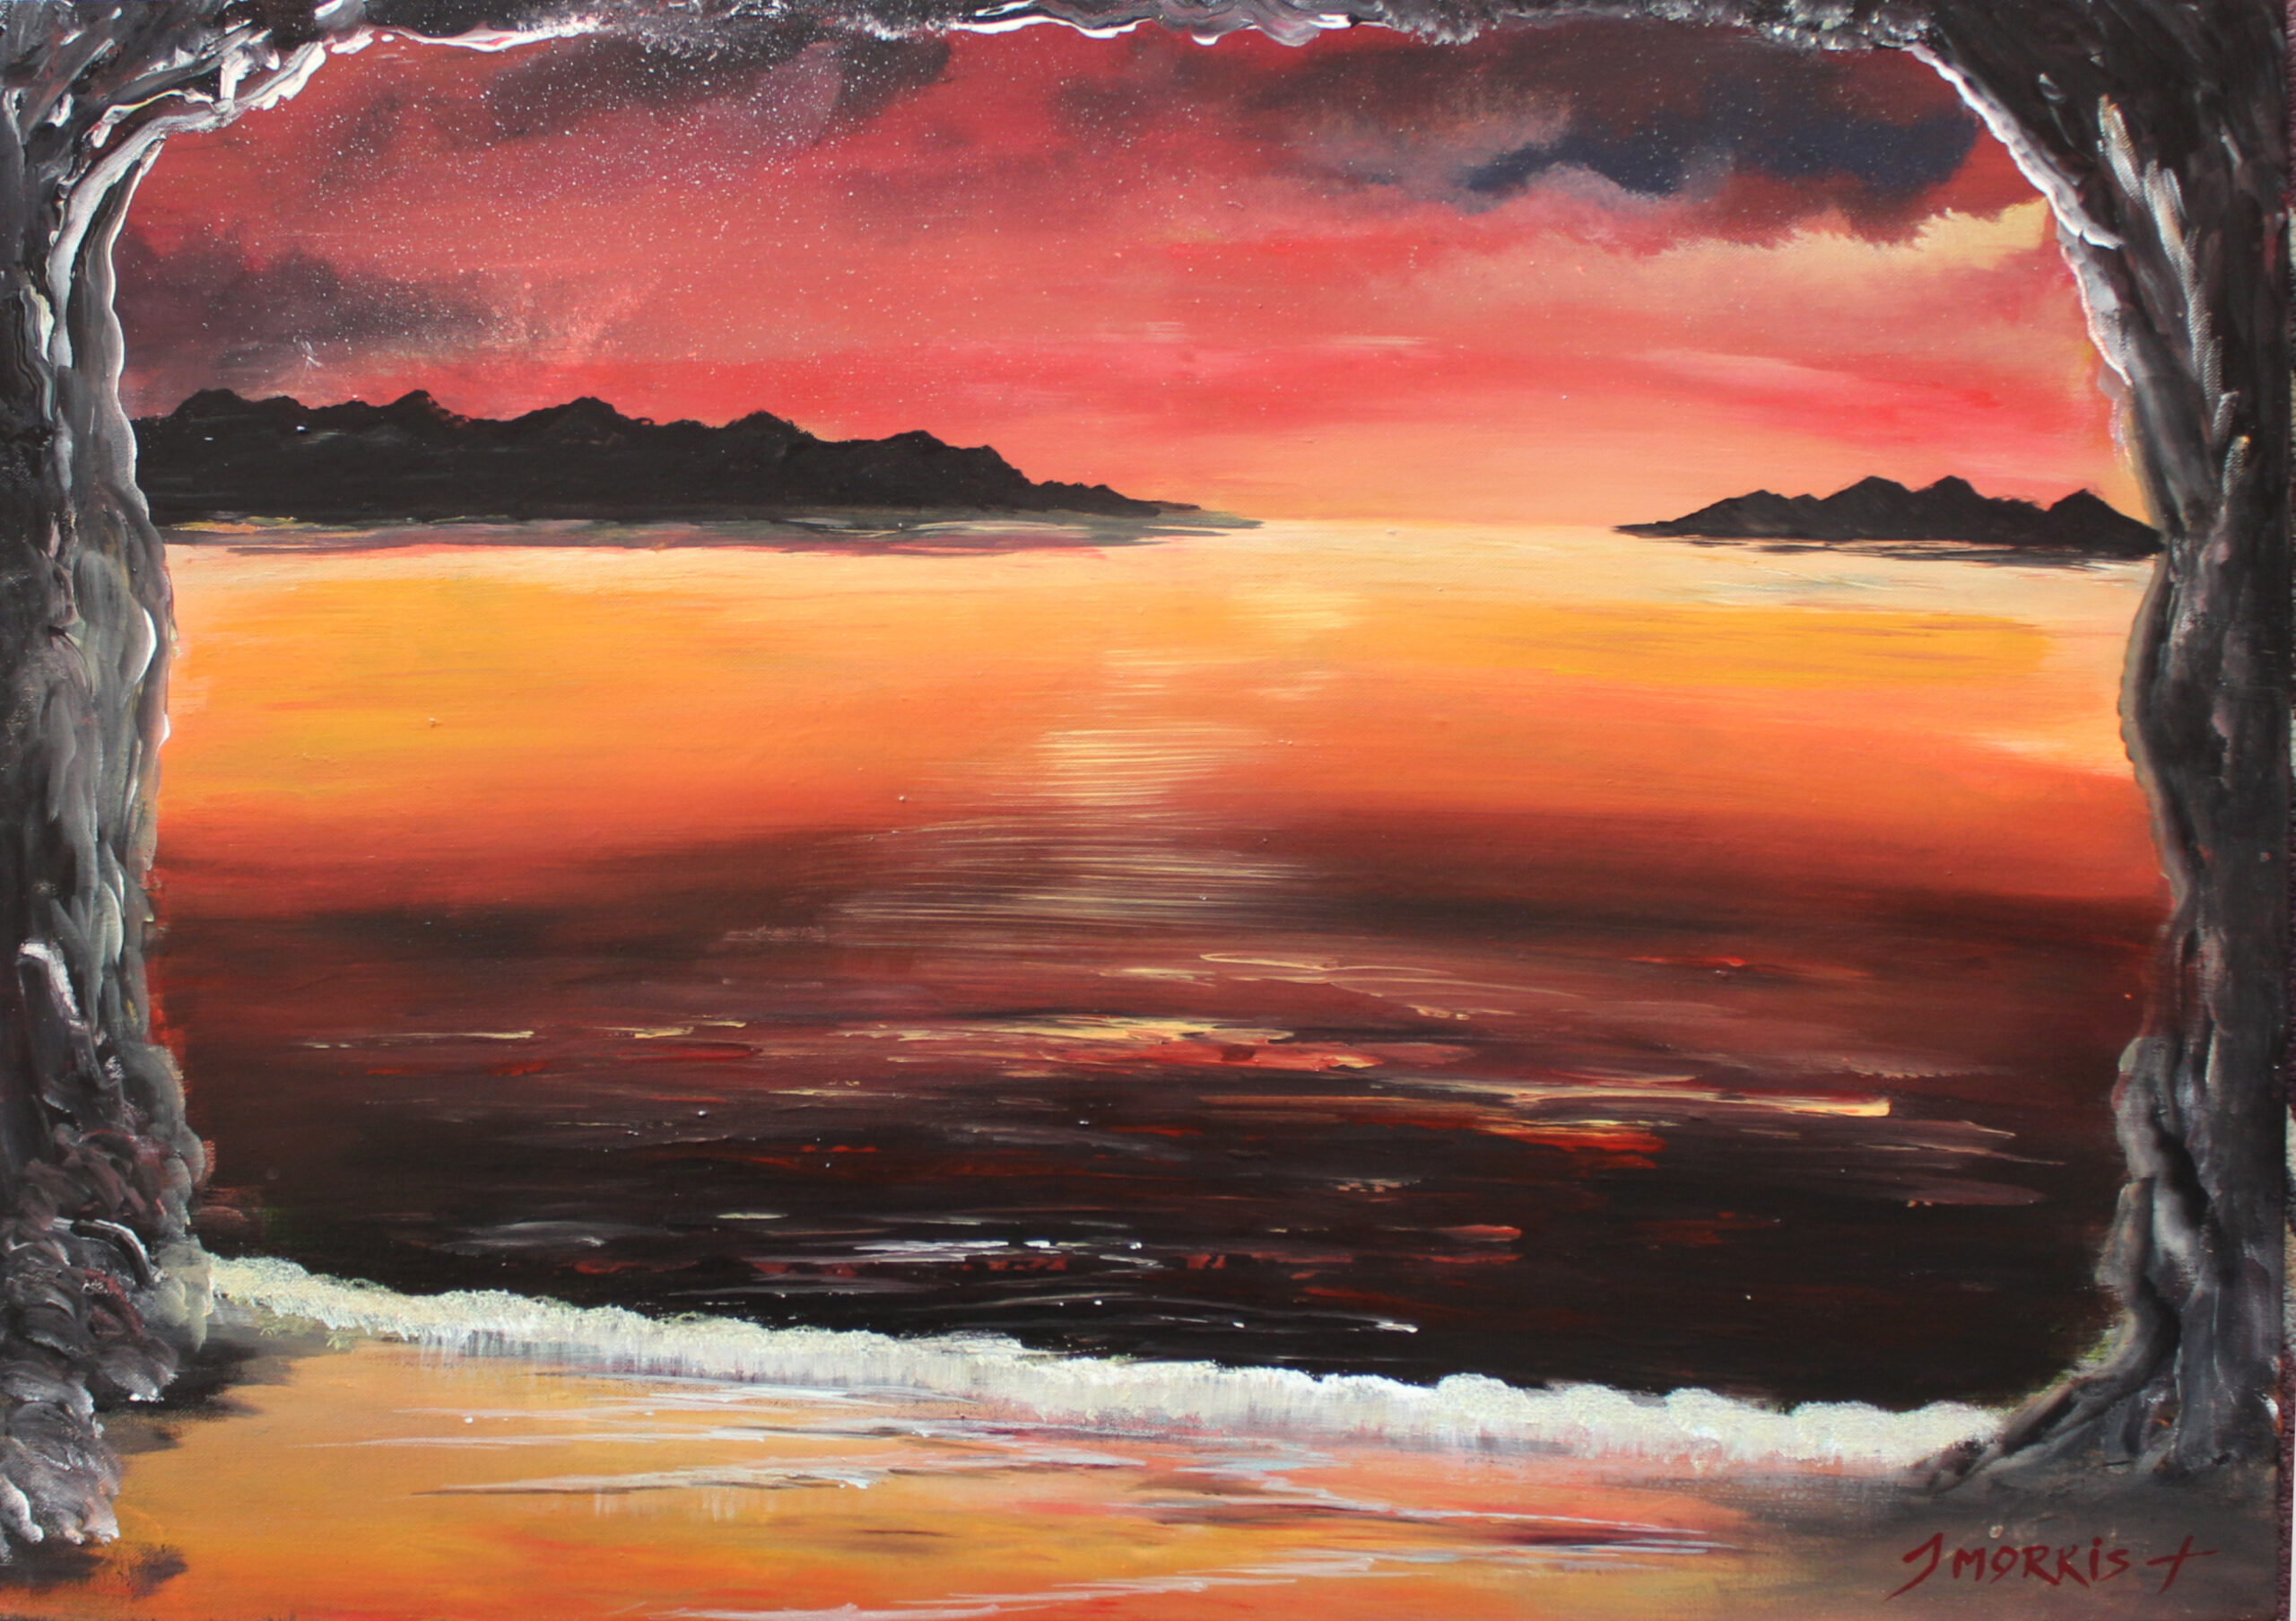 Sunset of the sea – Seascape painting